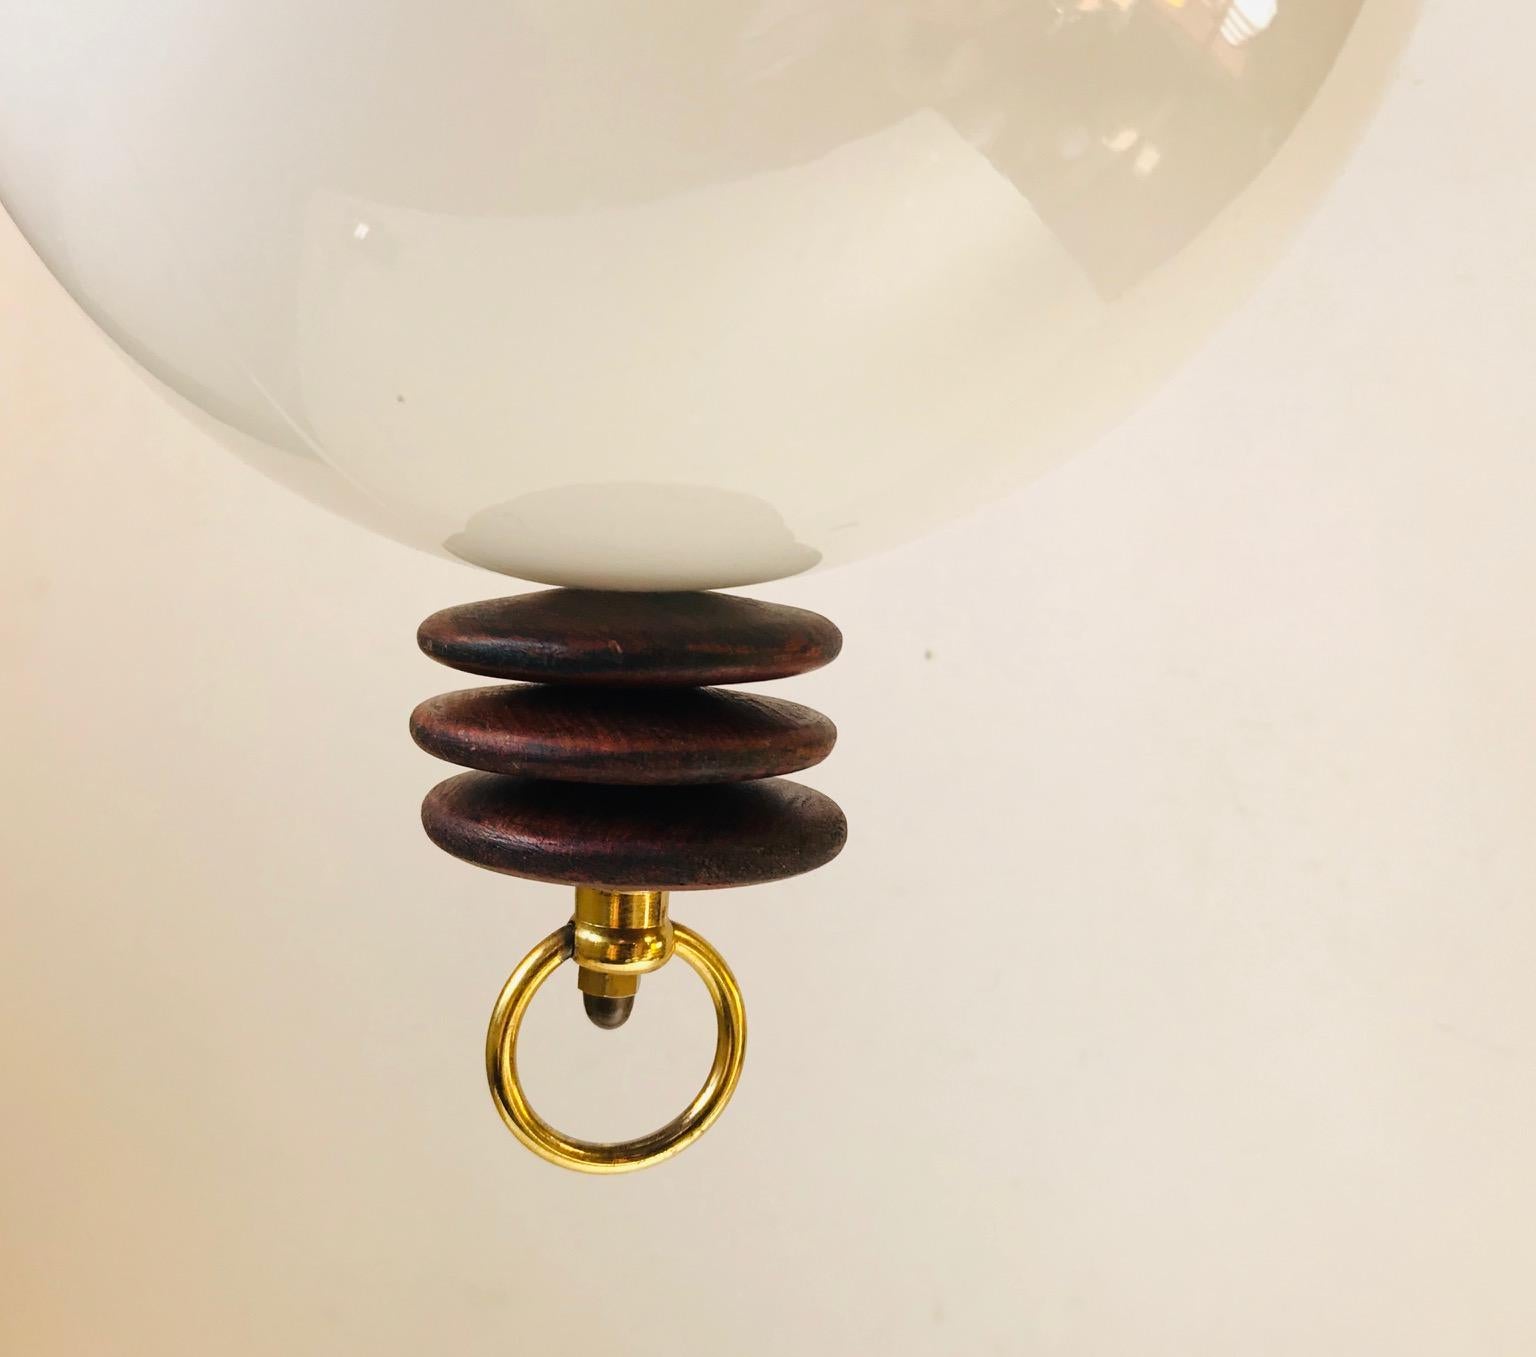 Mid-Century Modern Unusual Midcentury Pendant Lamp with Rosewood Rattle, Denmark, 1950s For Sale